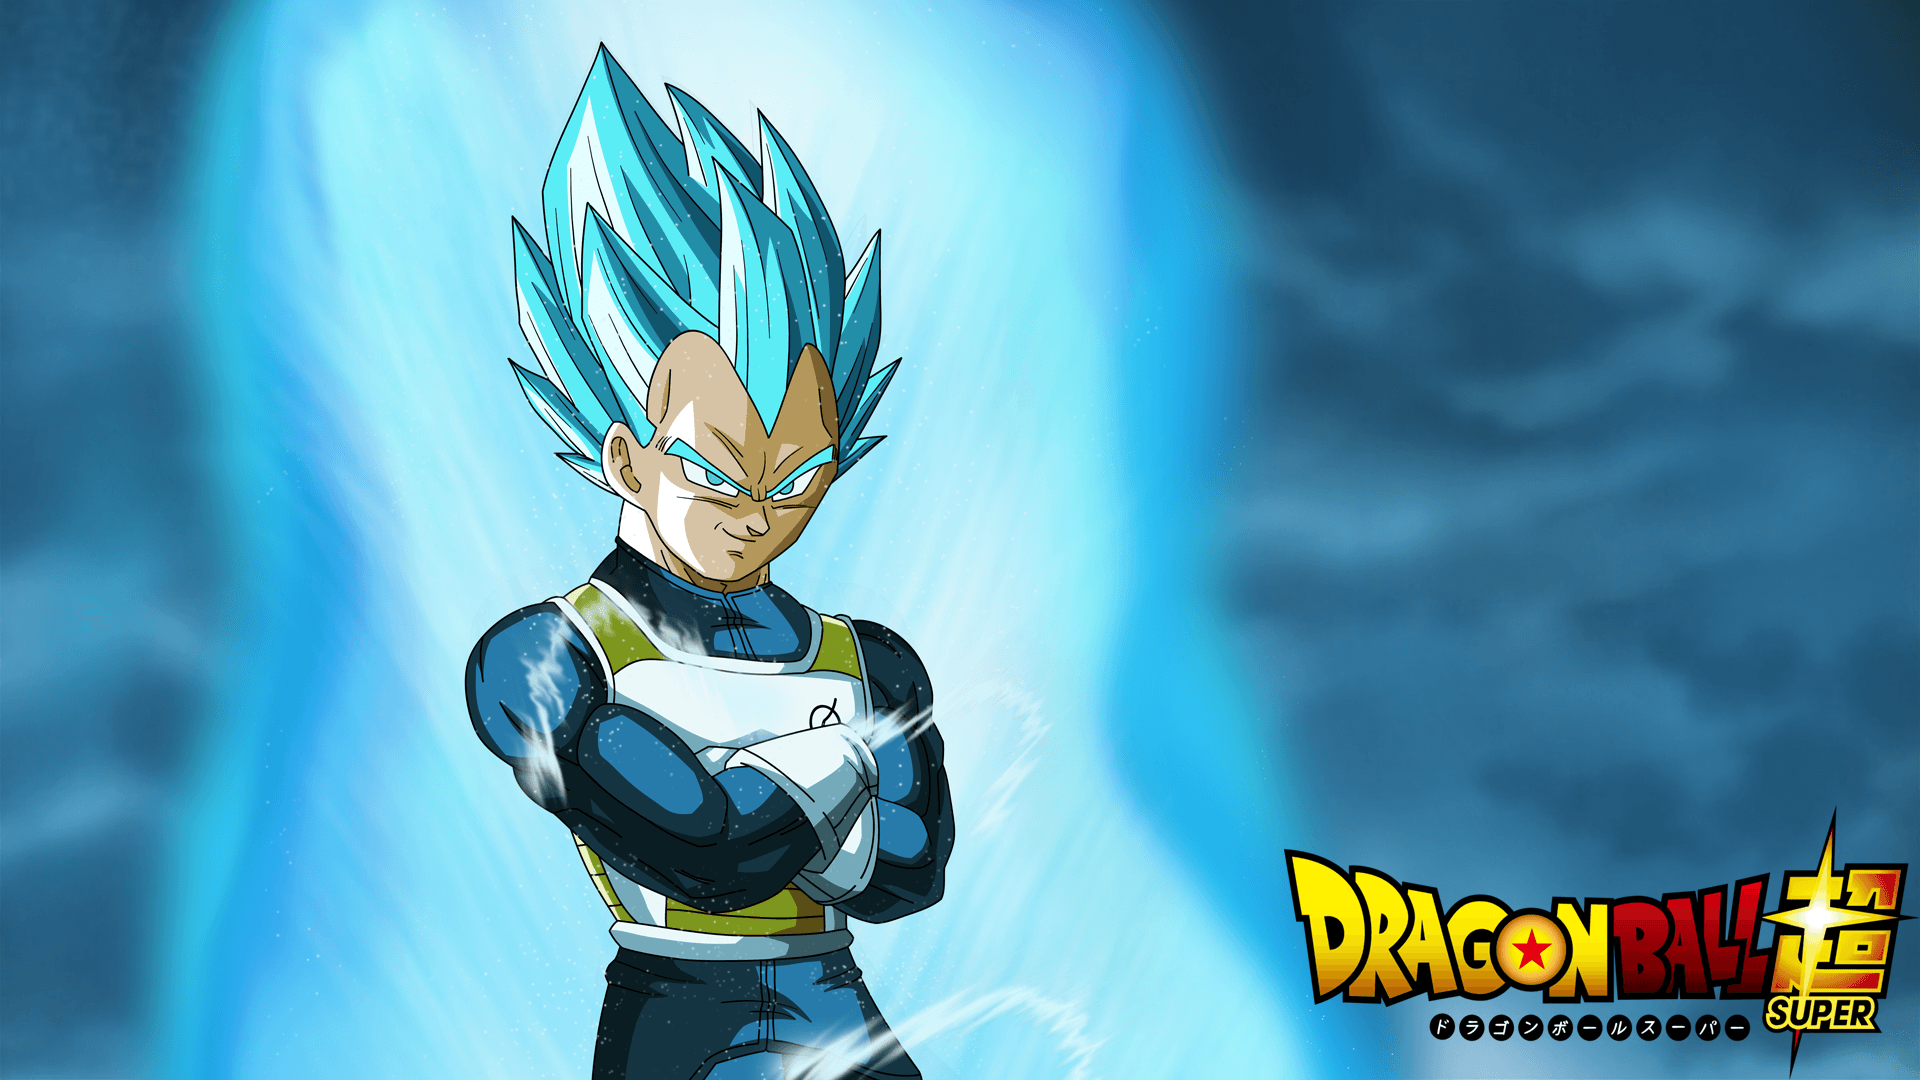 HD Wallpaper for Dragon Ball Z and S Lovers